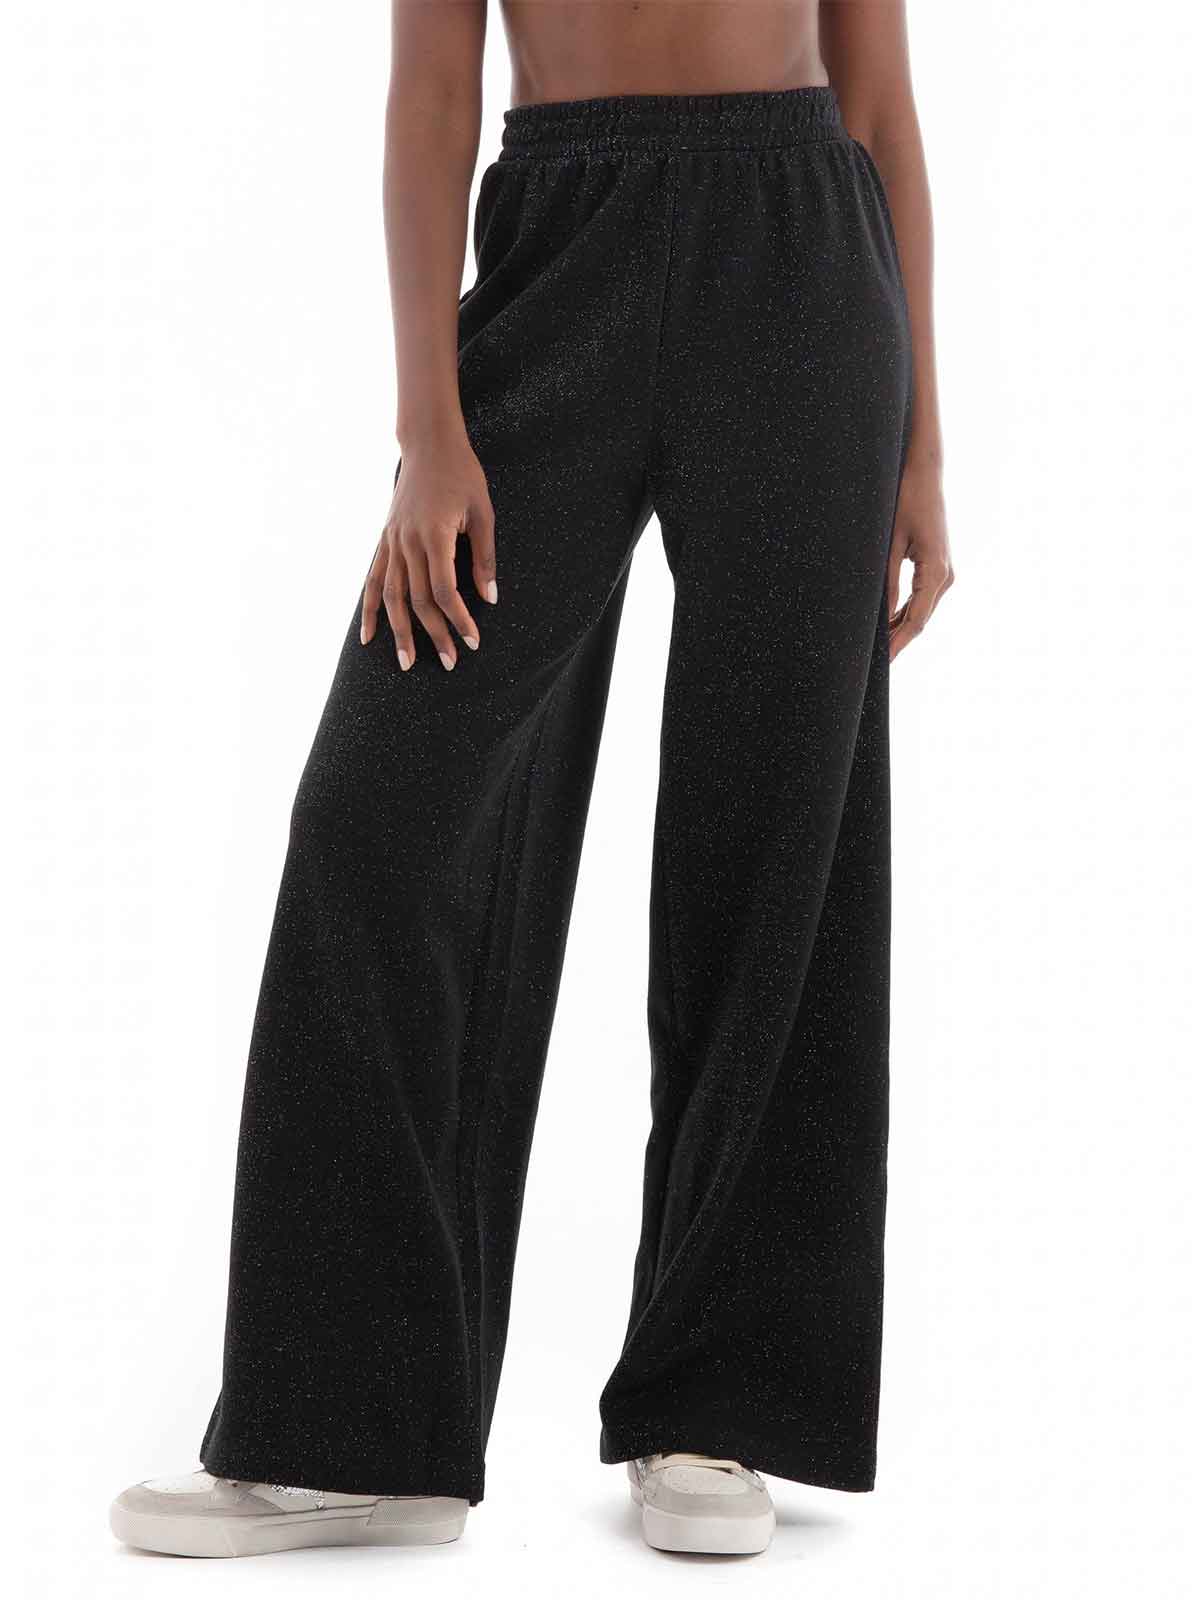   Only | Julia Superwide Shine Pant |  